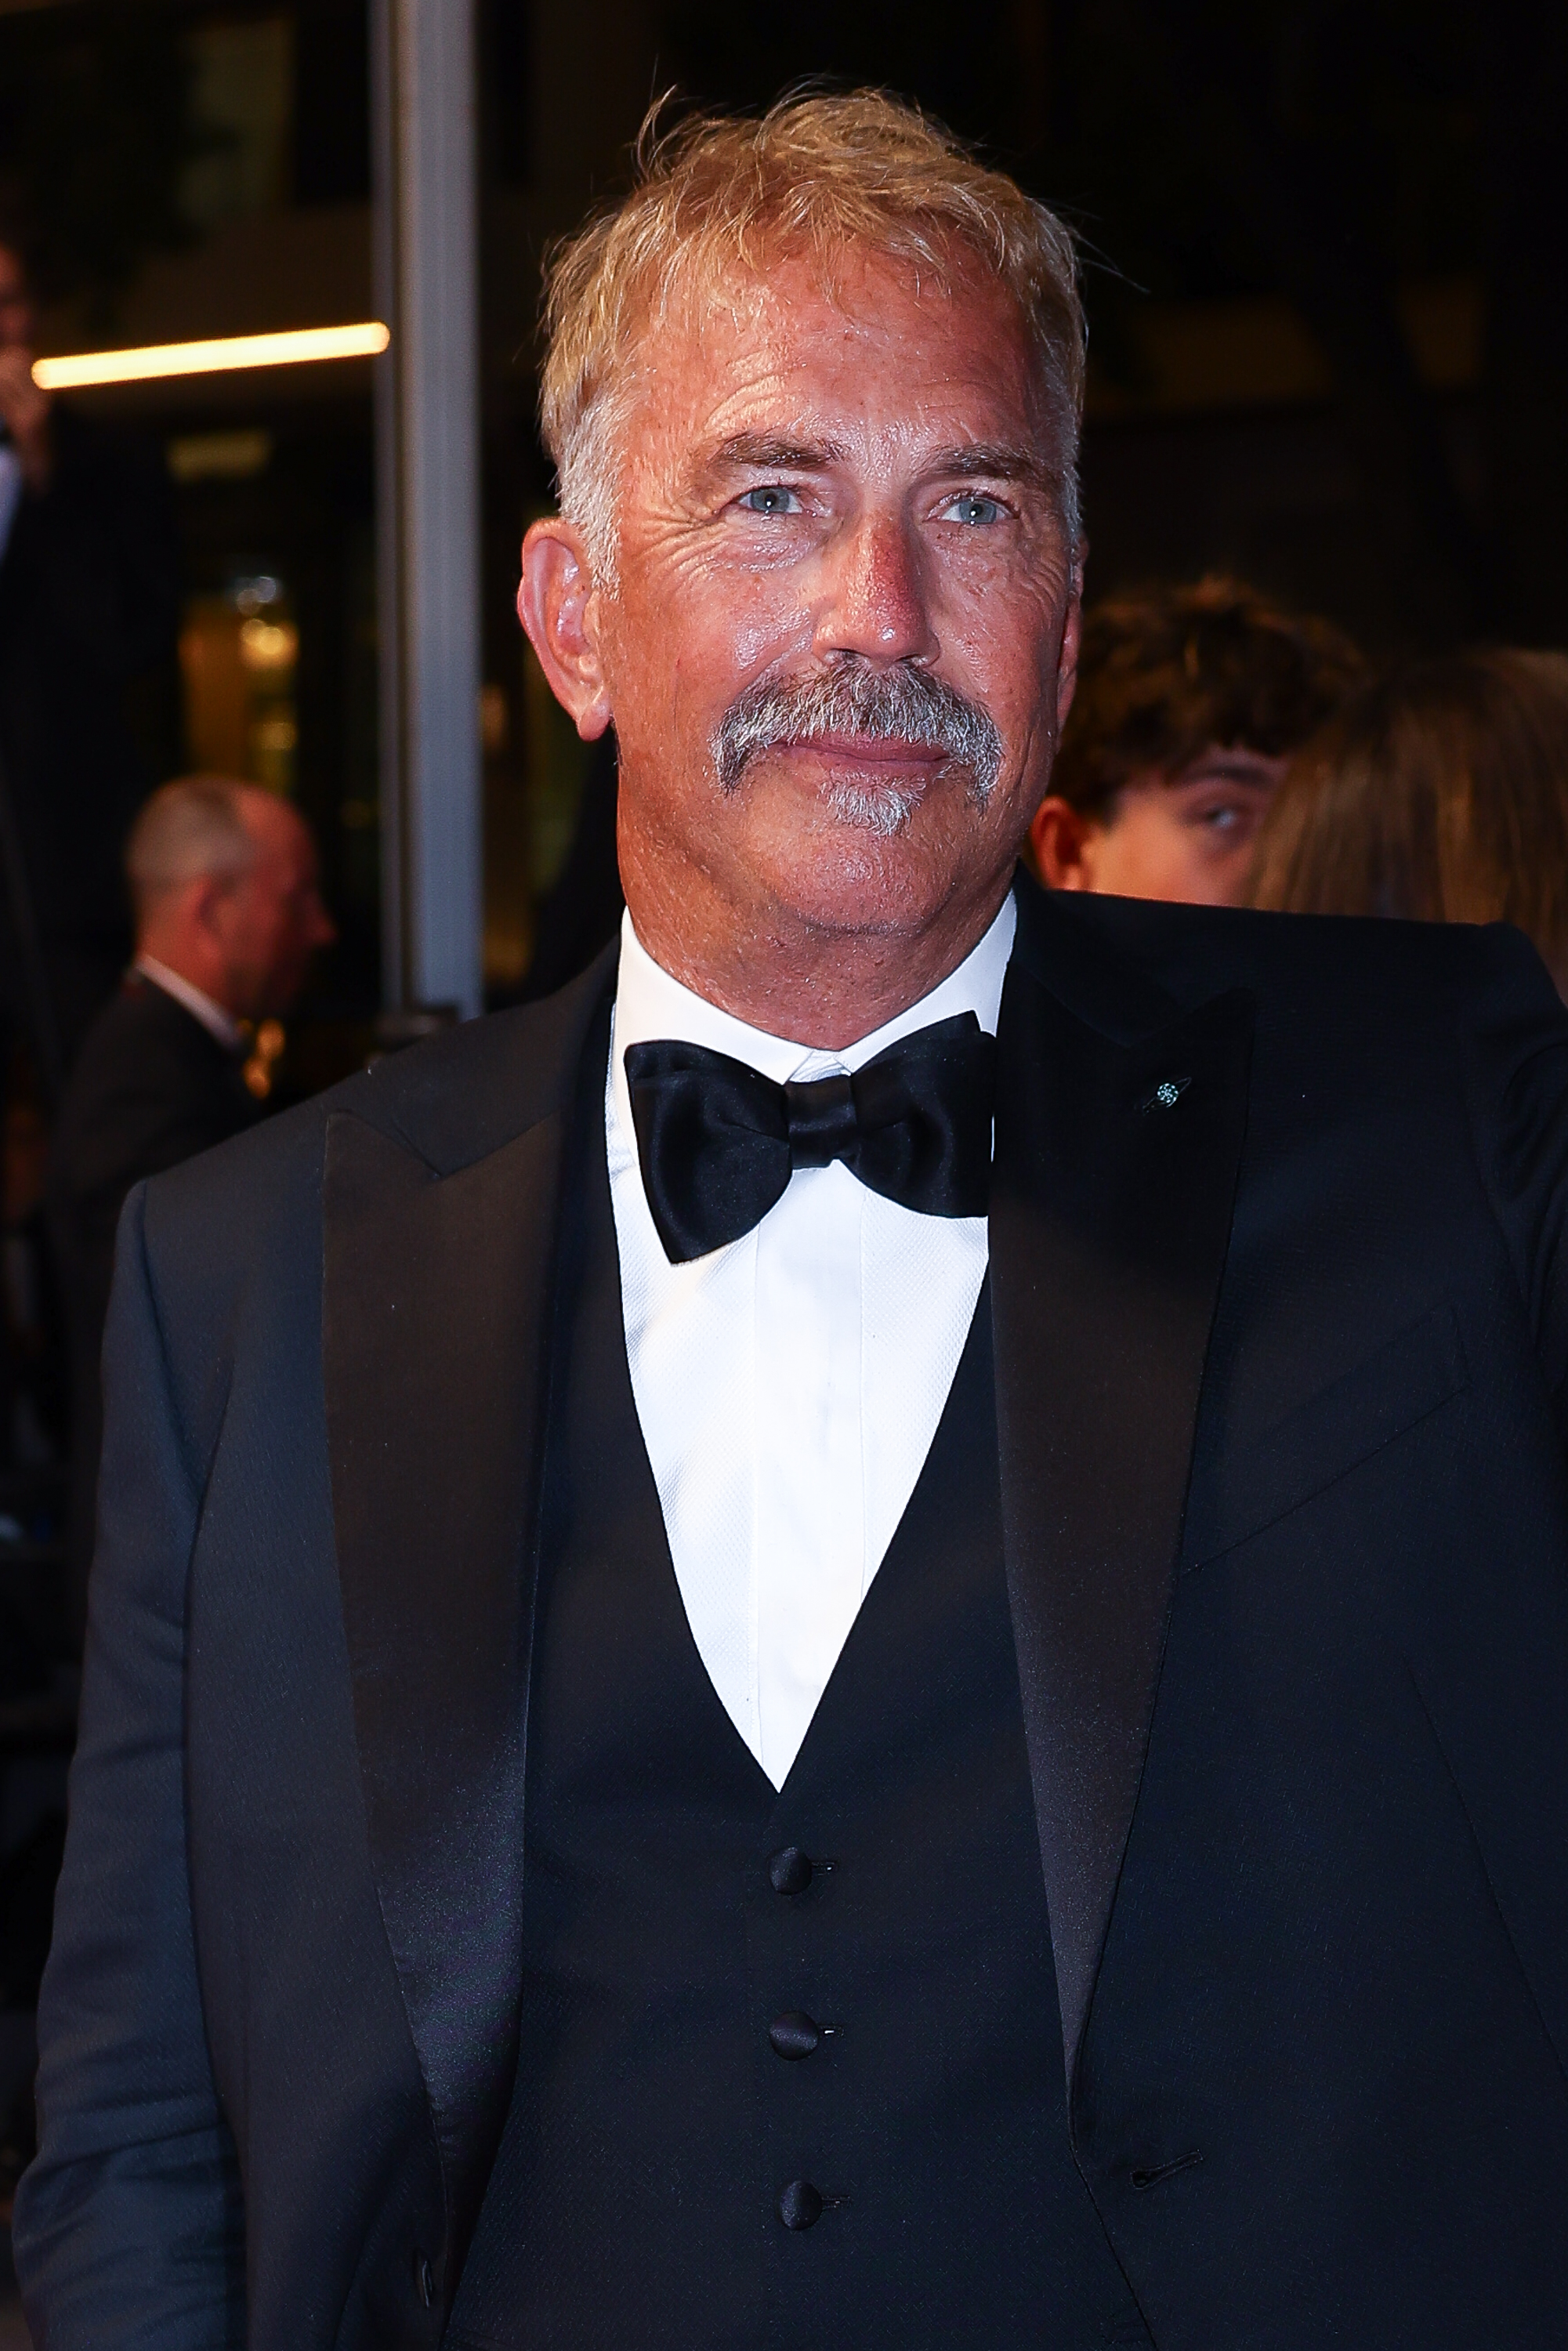 Kevin Costner during the 77th annual Cannes Film Festival at Palais des Festivals on May 19, 2024, in Cannes, France. | Source: Getty Images